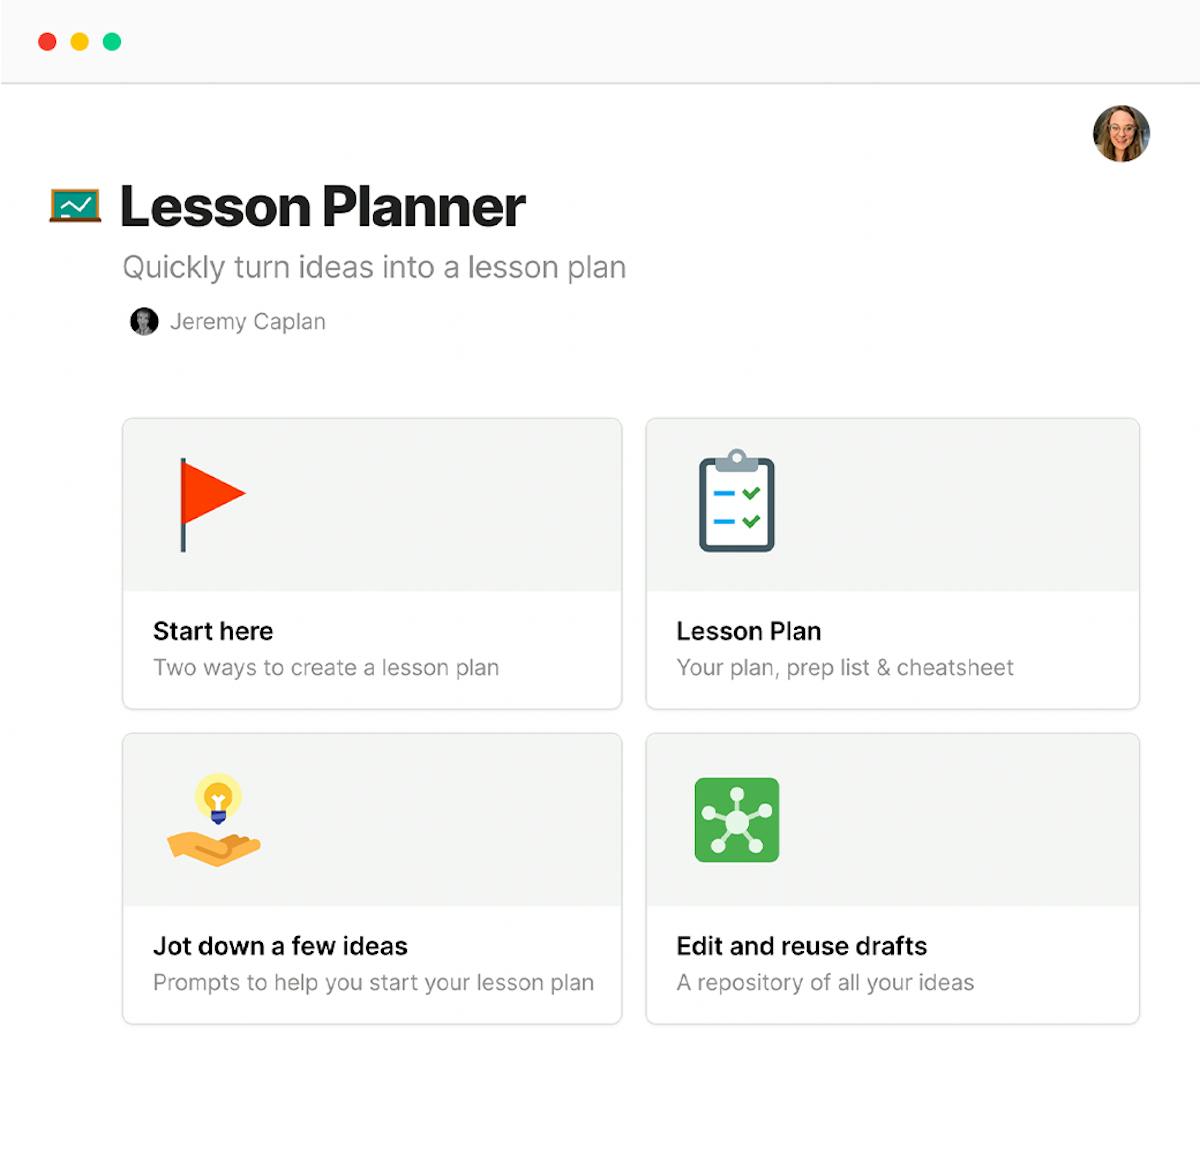 Lesson planner built in Coda - a hub for lesson planning and ideas.